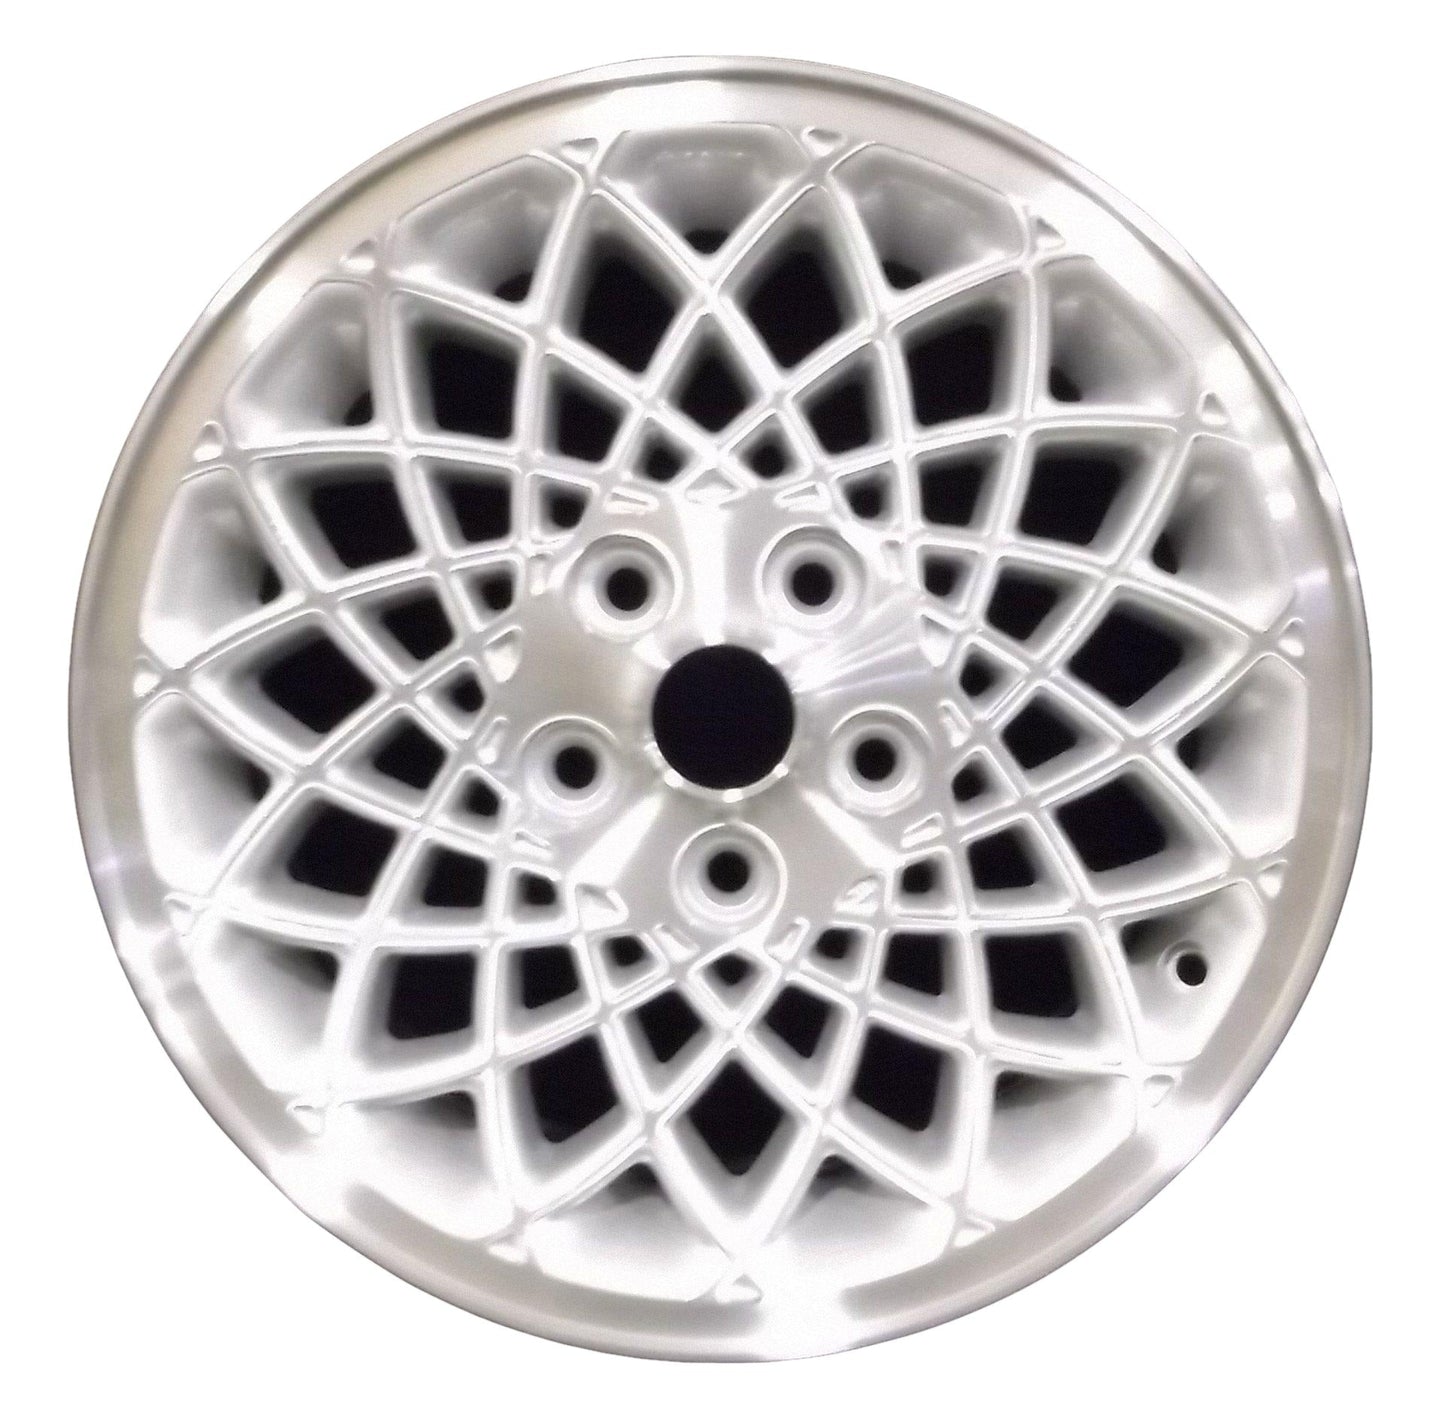 Chrysler Concorde  1993, 1994, 1995 Factory OEM Car Wheel Size 16x7 Alloy WAO.2020.PS02.MA